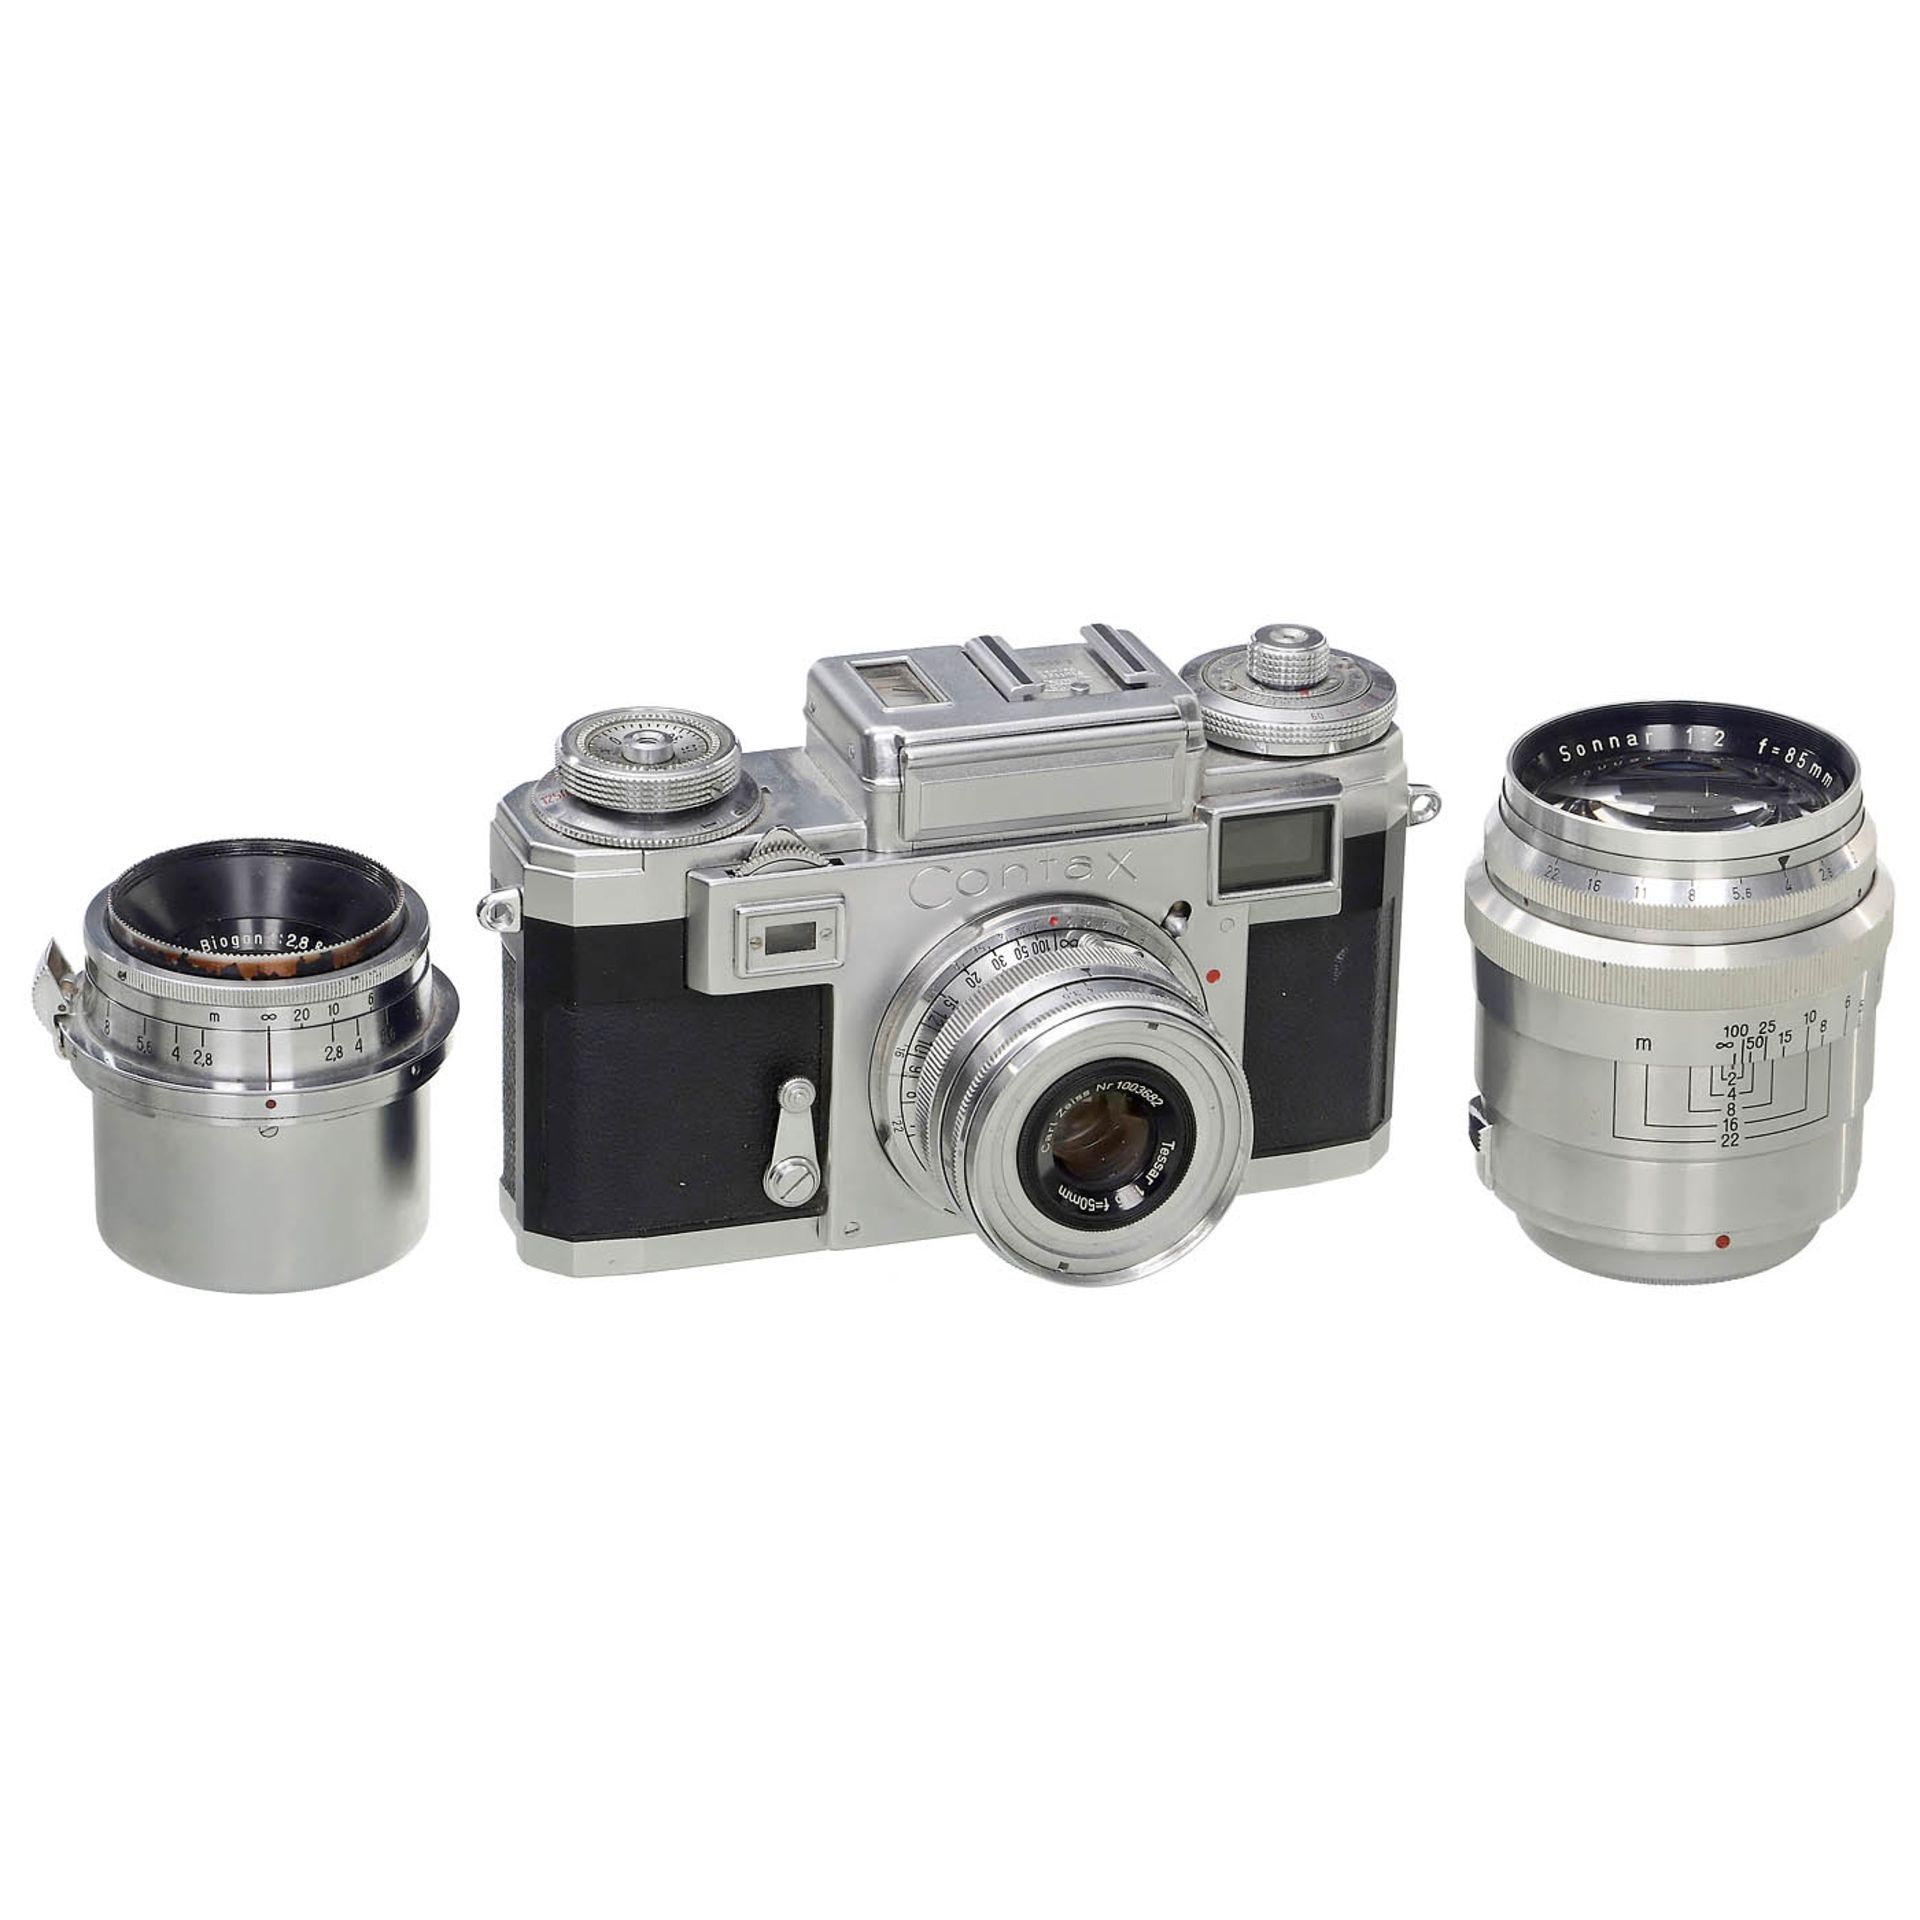 Contax III Outfit with 7 Lenses and 2 Viewfinders, c. 1948-60 - Bild 2 aus 4